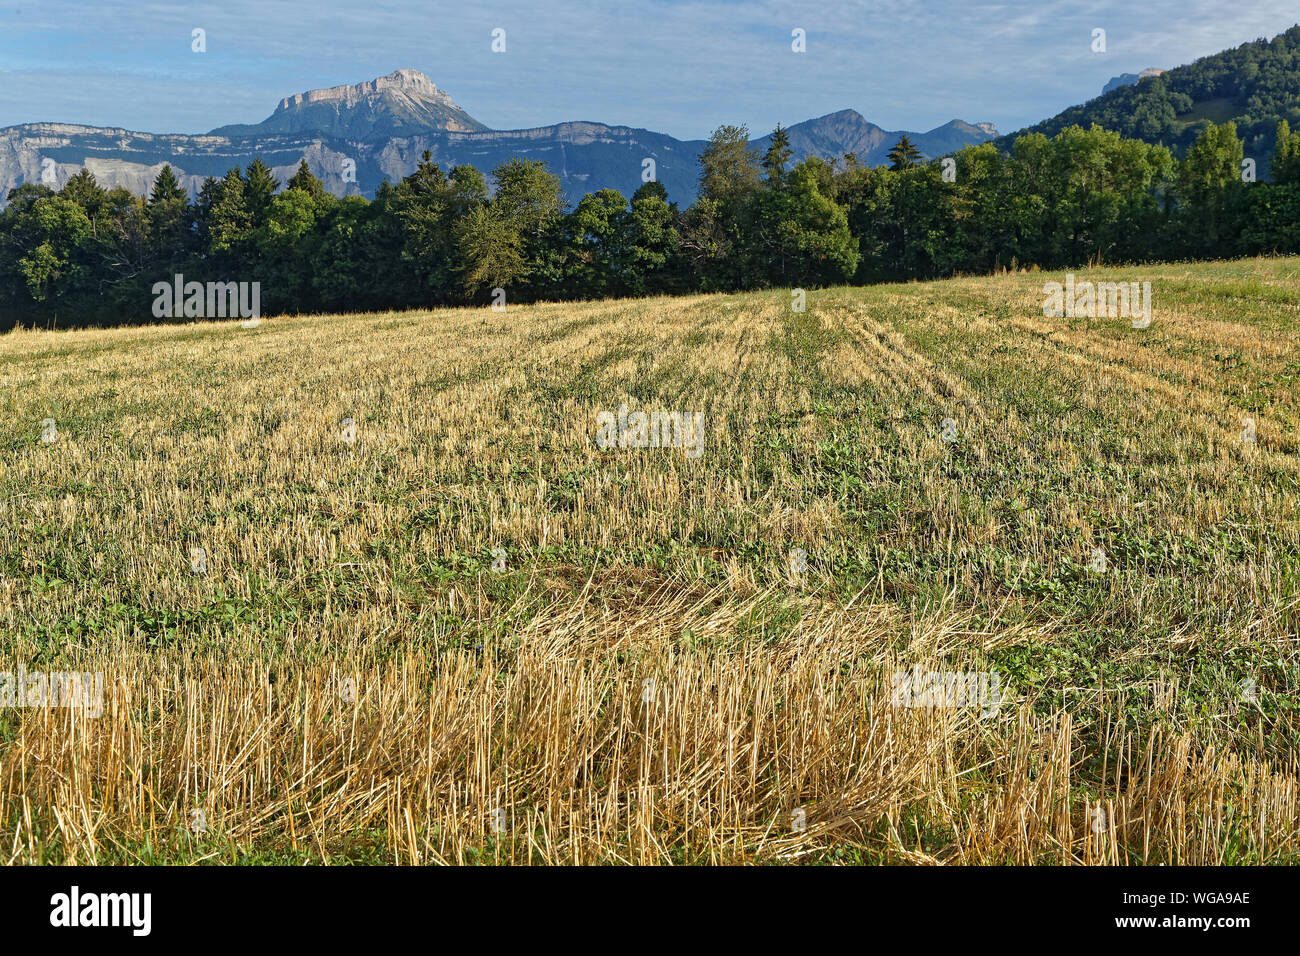 Harvested fields with Chartreuse mountain range in the background on a sunny summer day Stock Photo